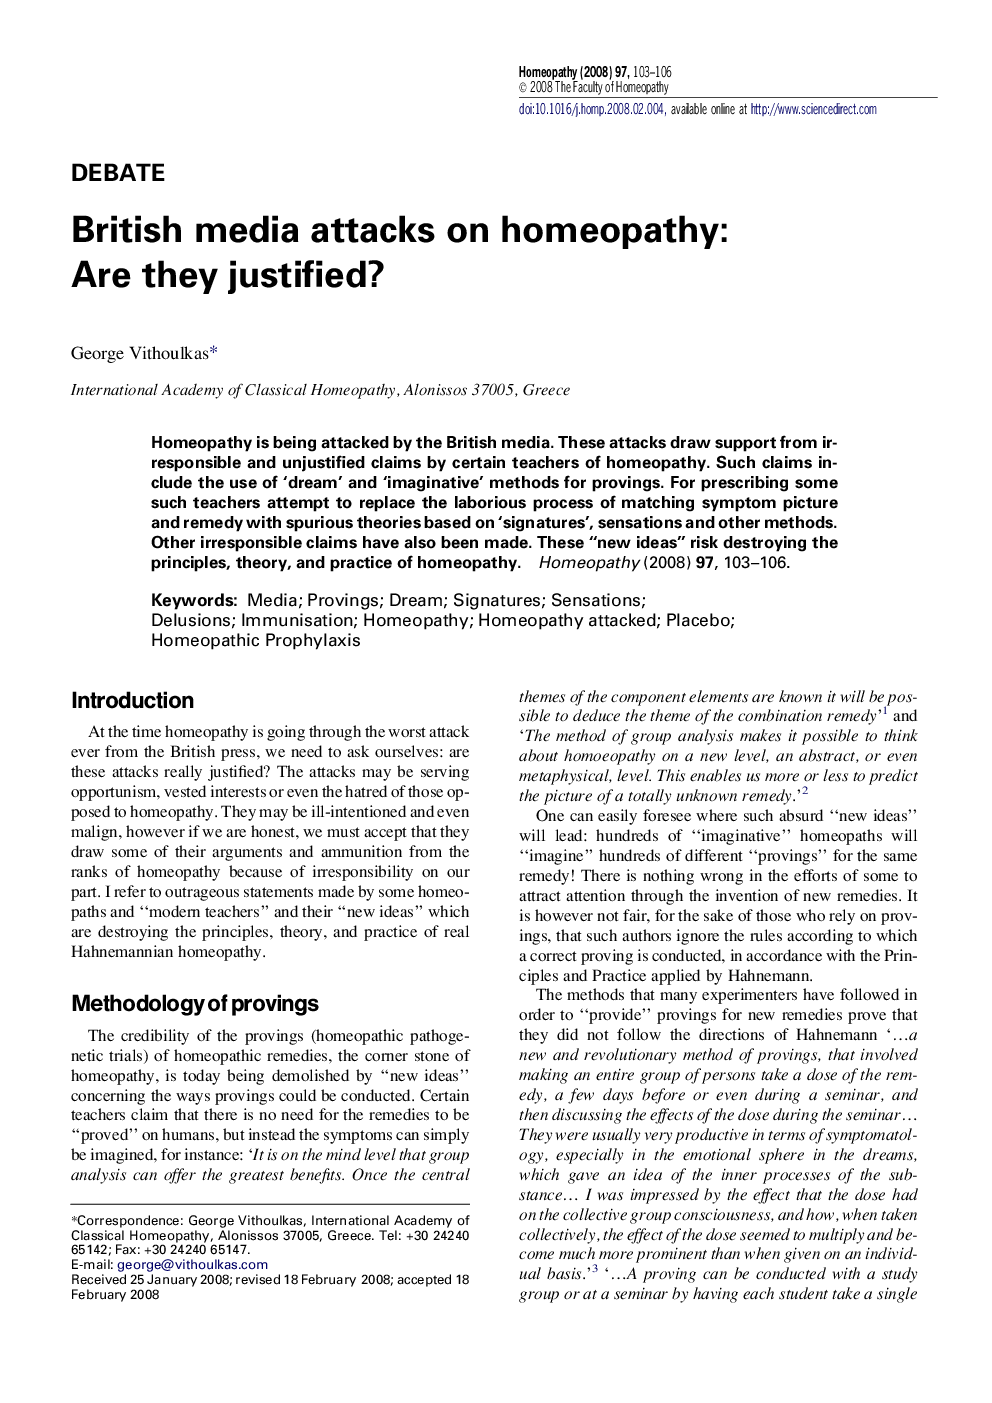 British media attacks on homeopathy: Are they justified?